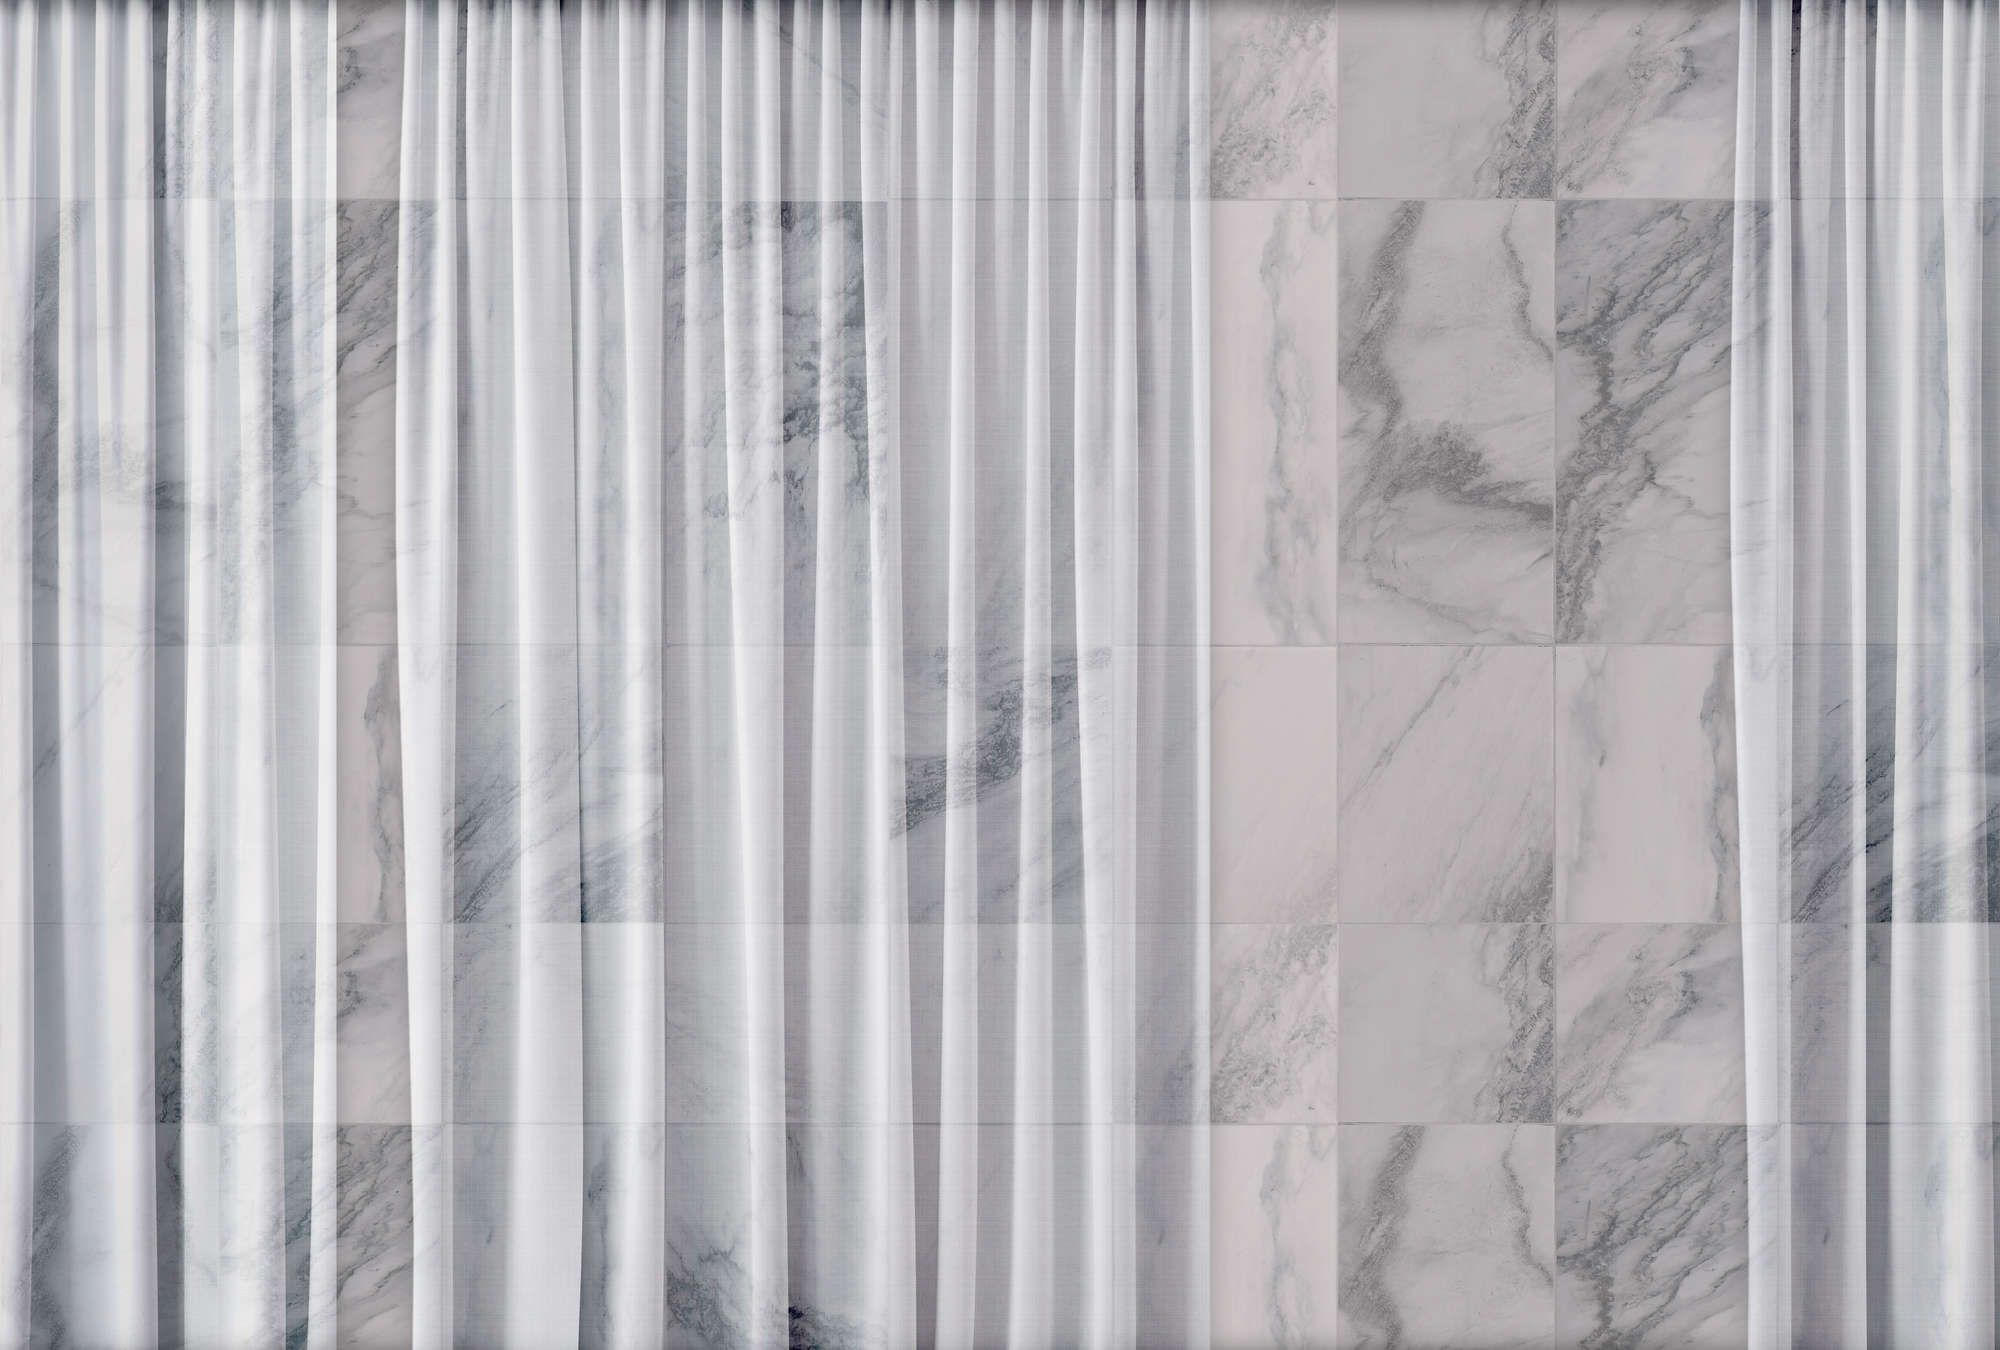             Photo wallpaper »nova 1« - Subtle falling white curtain in front of marble wall - Smooth, slightly shiny premium non-woven fabric
        